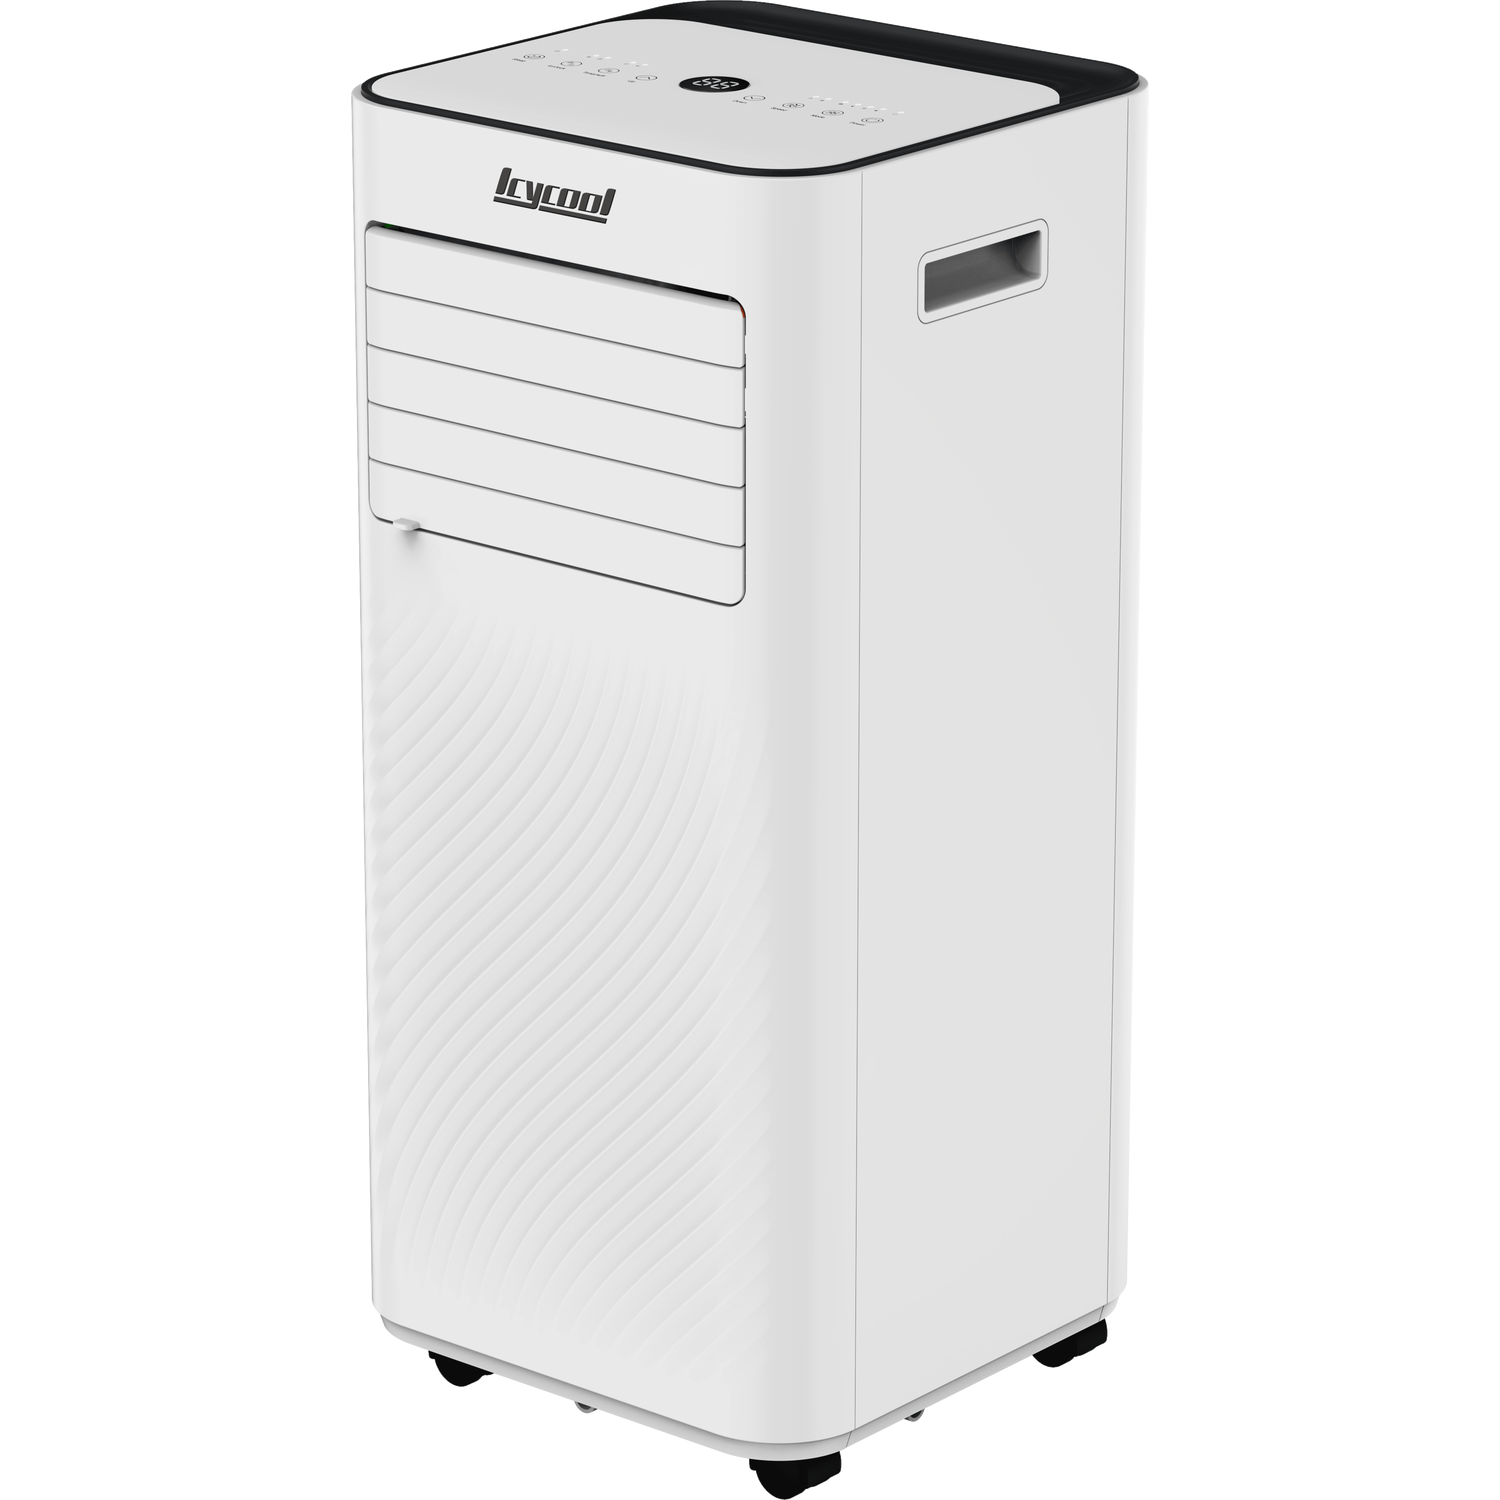 Icycool Portable Air Conditioner White Image 1